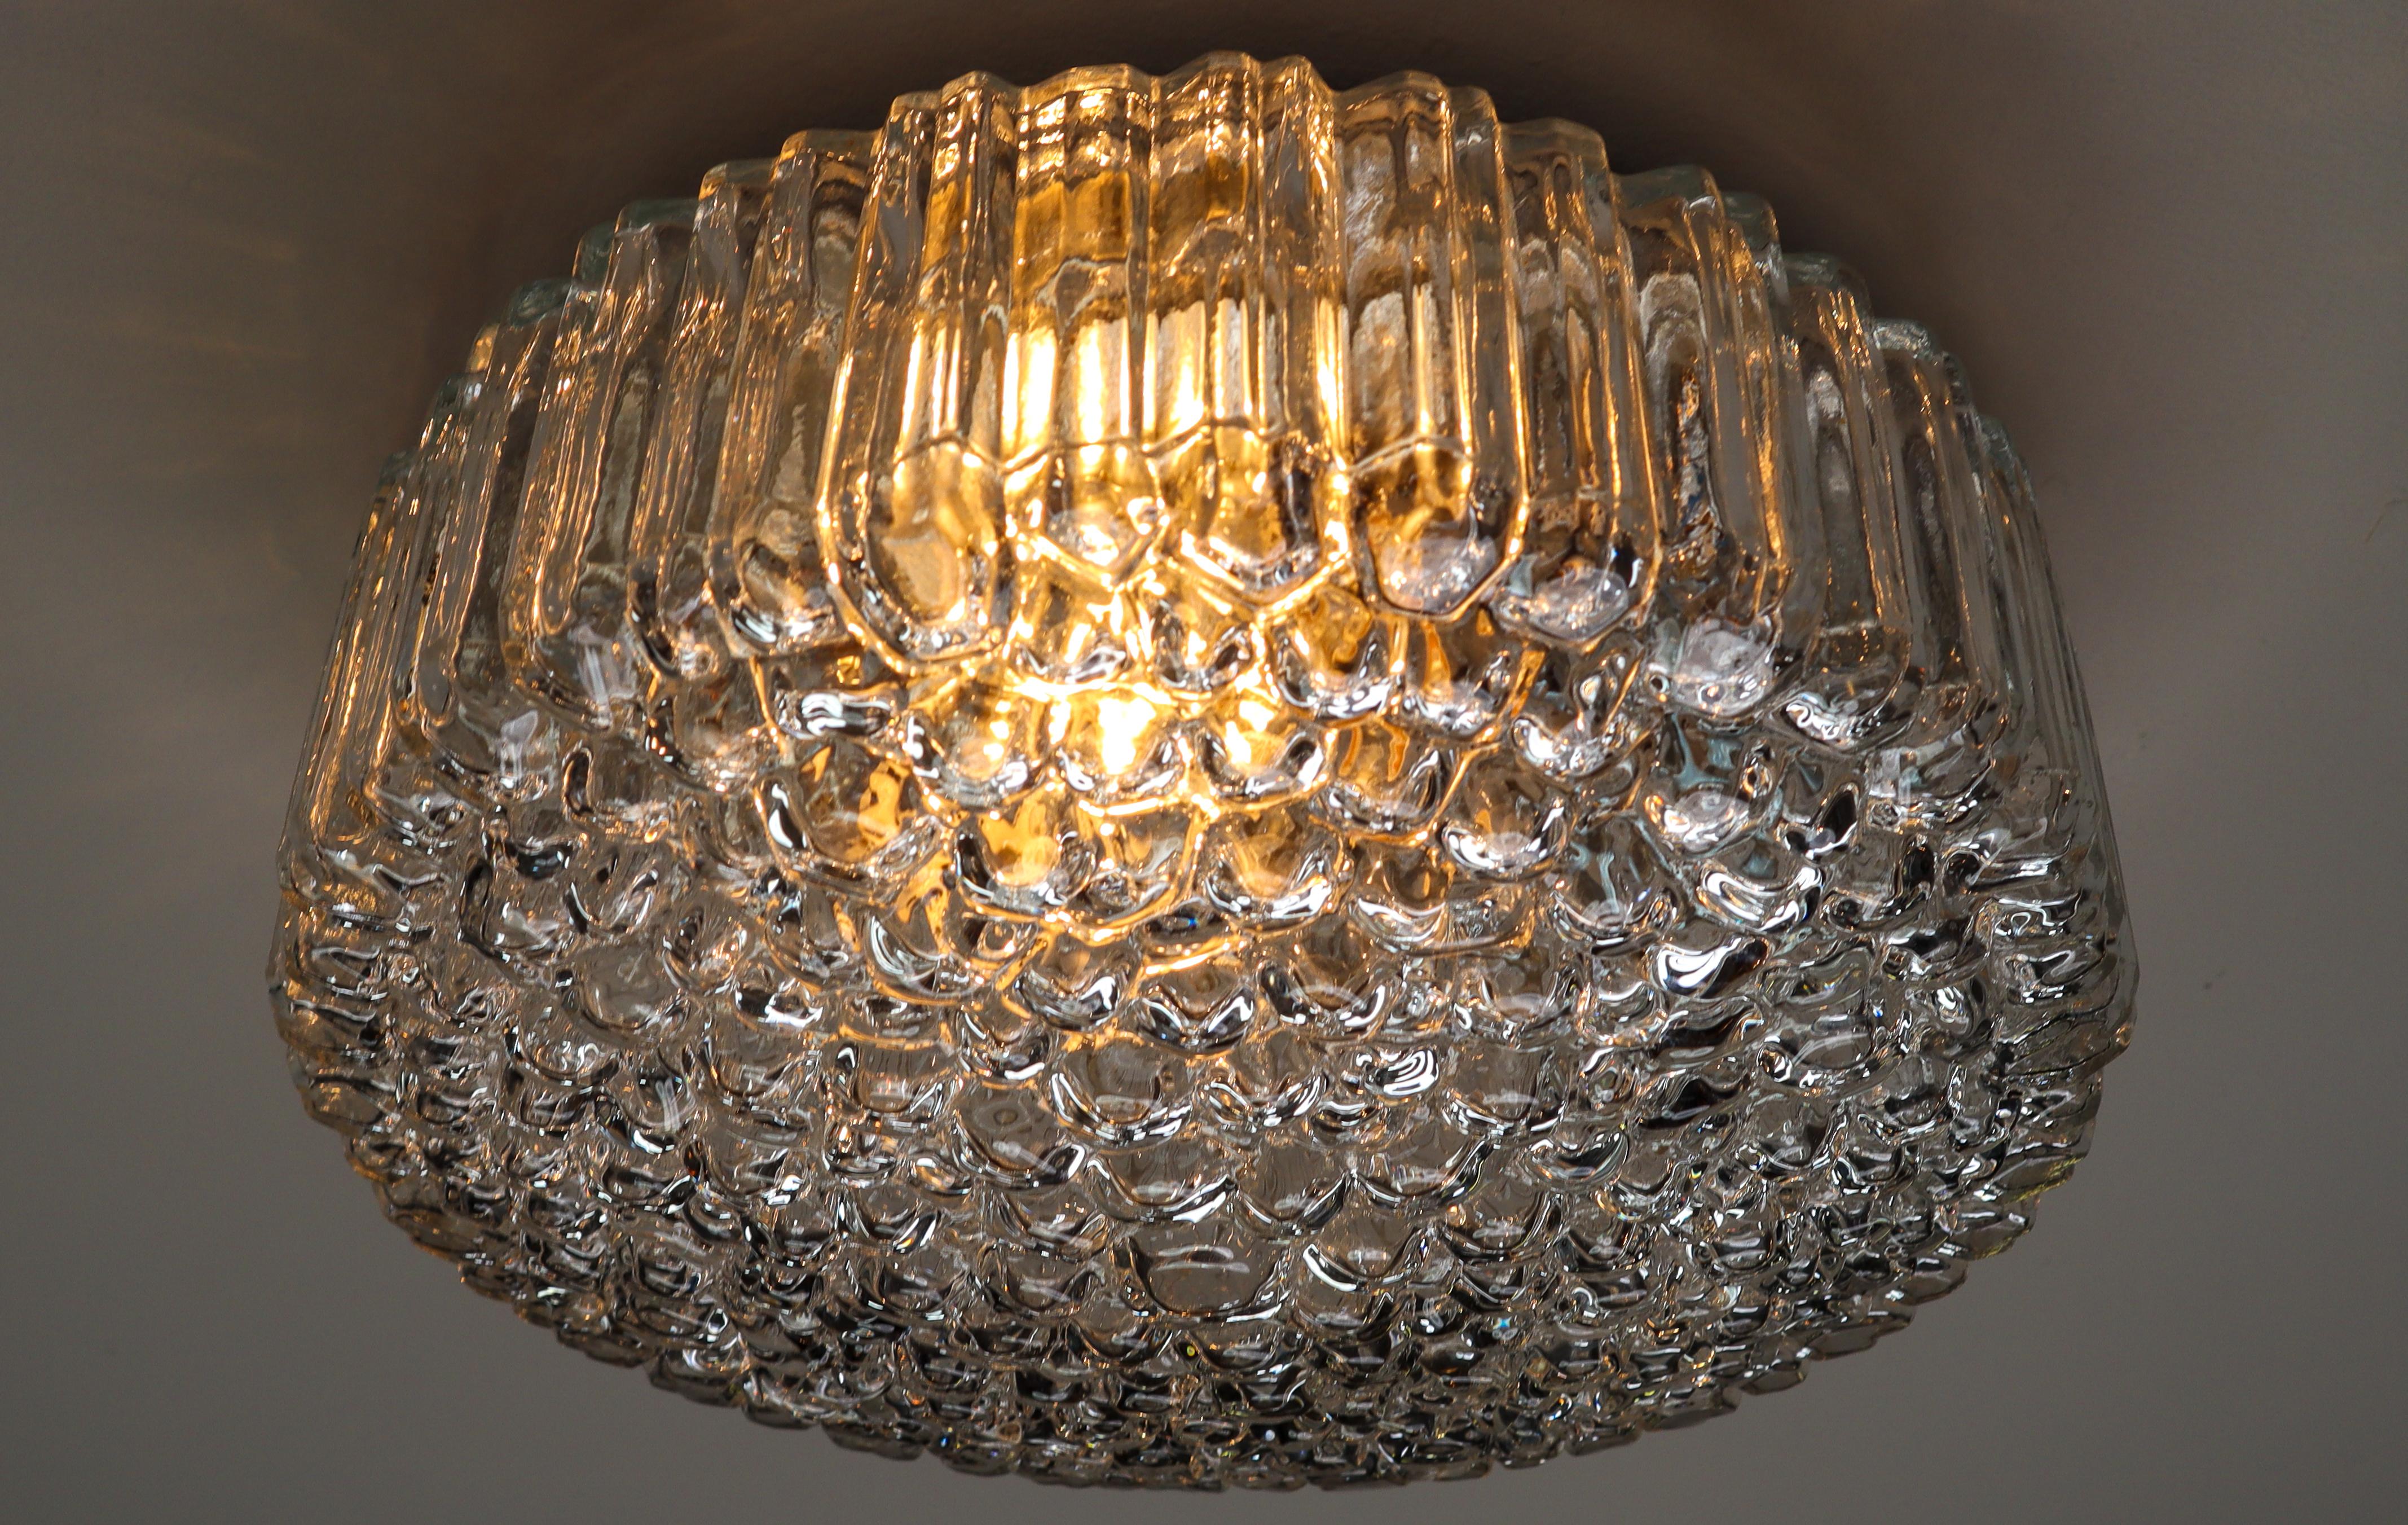 Gorgeous medium large flush mount ceiling light made of heavy textured clear iced glass by Glashütte Limburg made in Germany, 1960s. This midcentury vintage lamp illuminates beautifully, casting a warm light over a ceiling or wall. Very good vintage